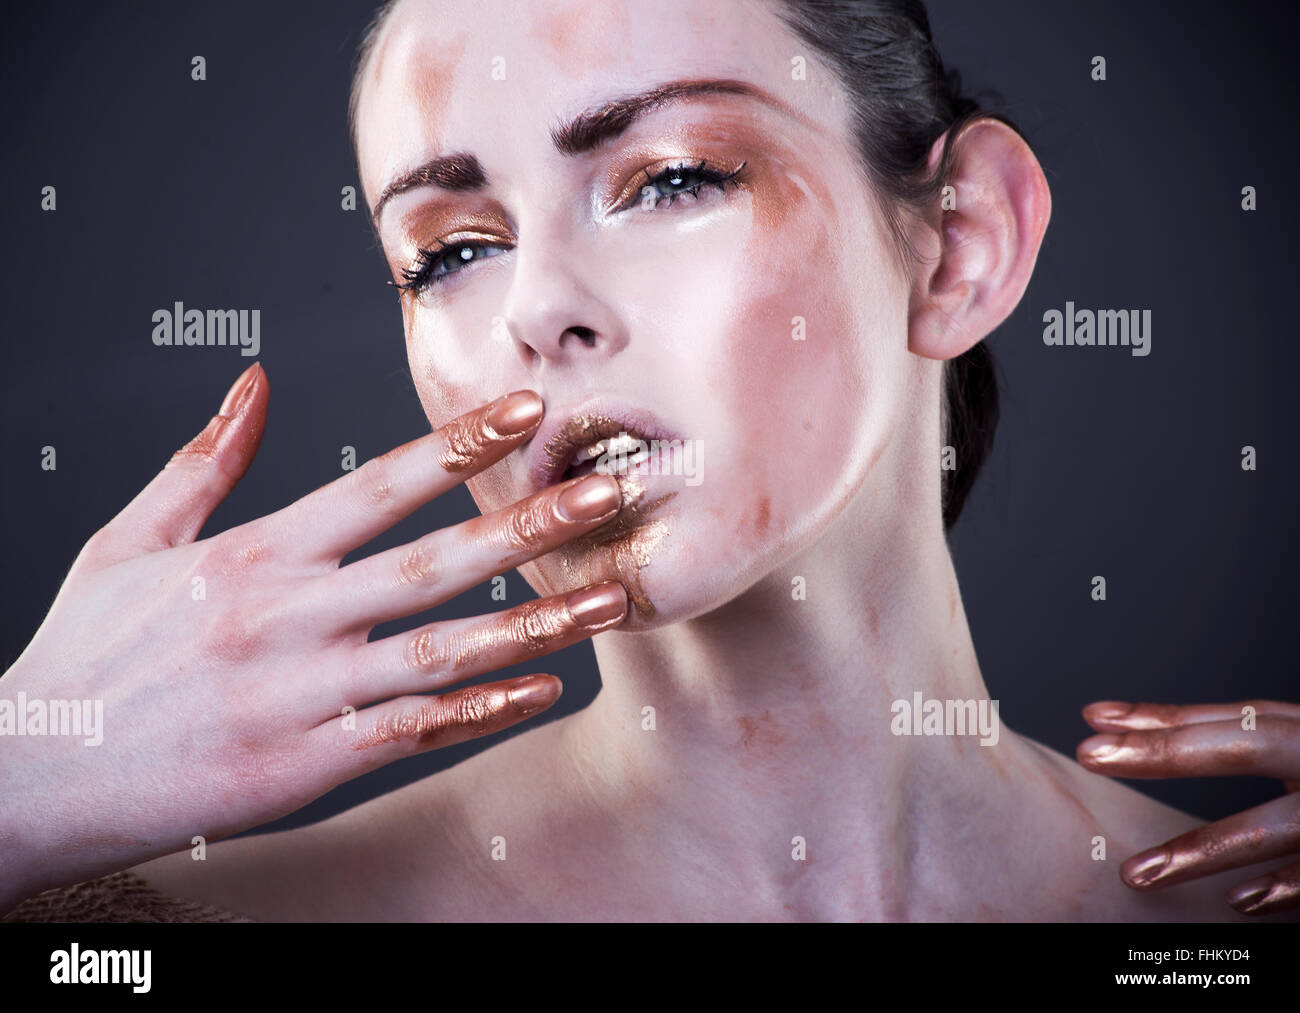 Beautiful fashion model with hand near mouth, brass paint make up on fingers and face, eyes slightly closed, intense expression Stock Photo